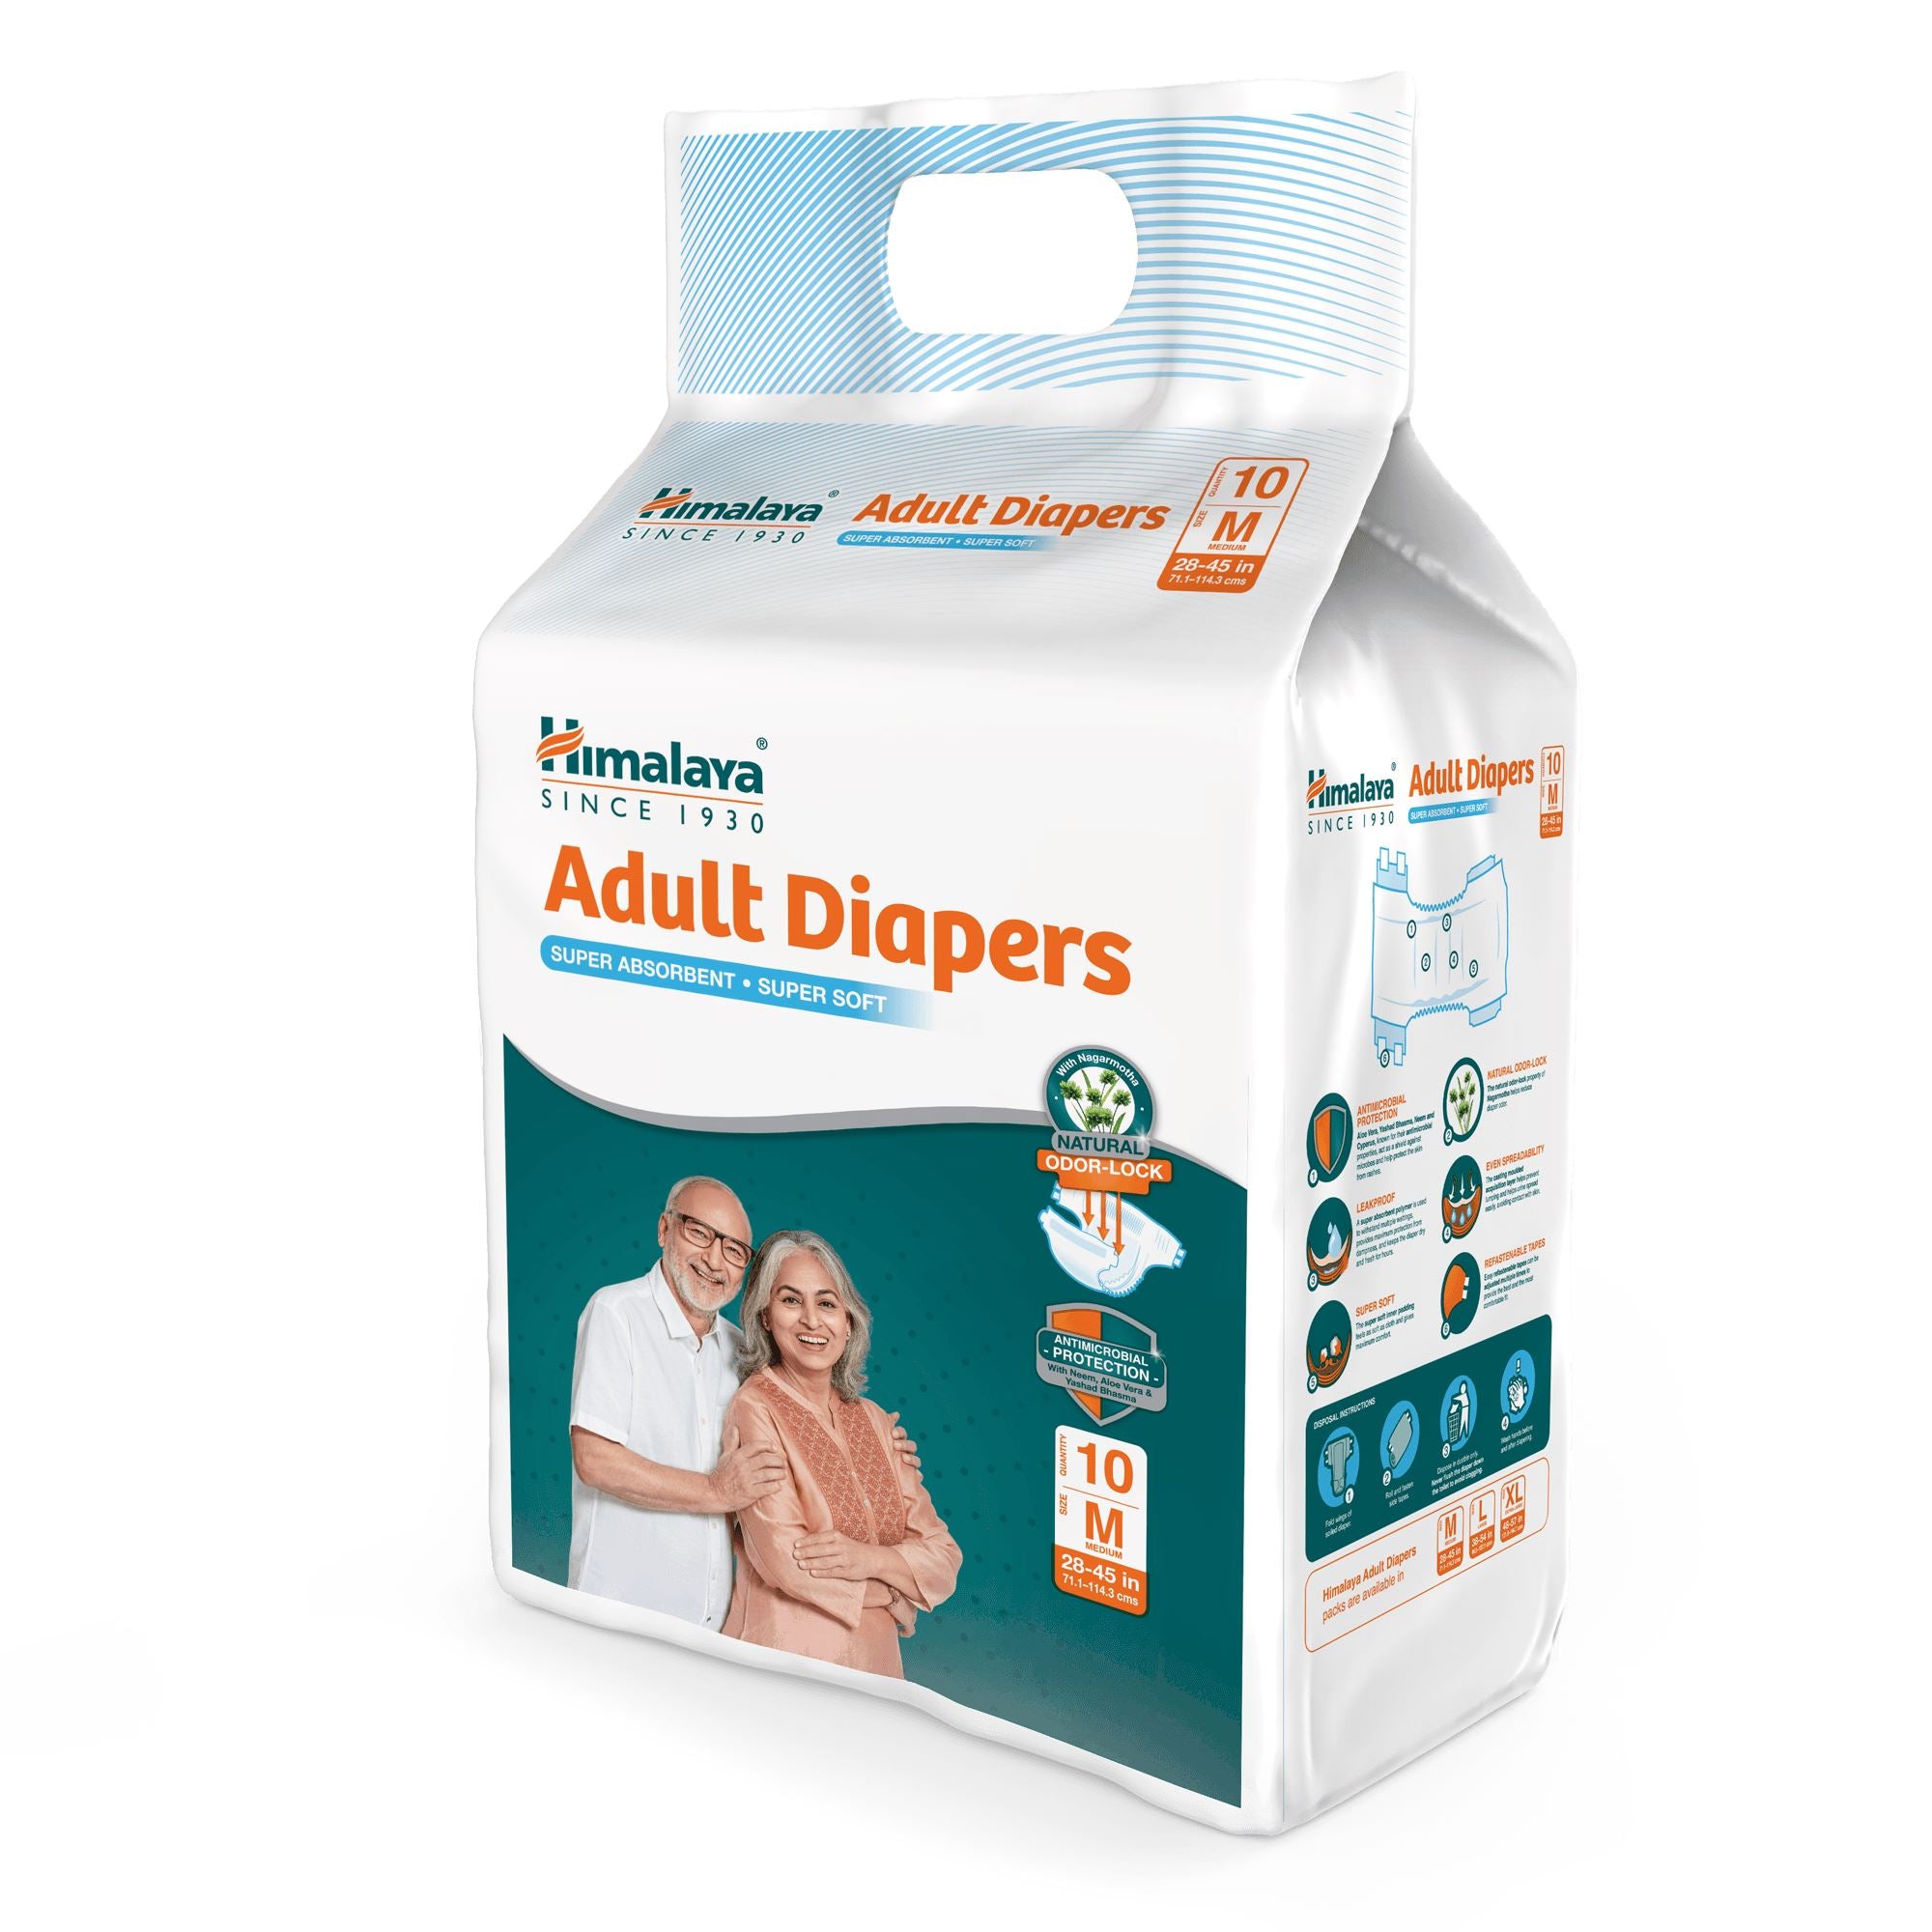 Himalaya Adult Diapers - Soft and easy-to-fit adult diapers